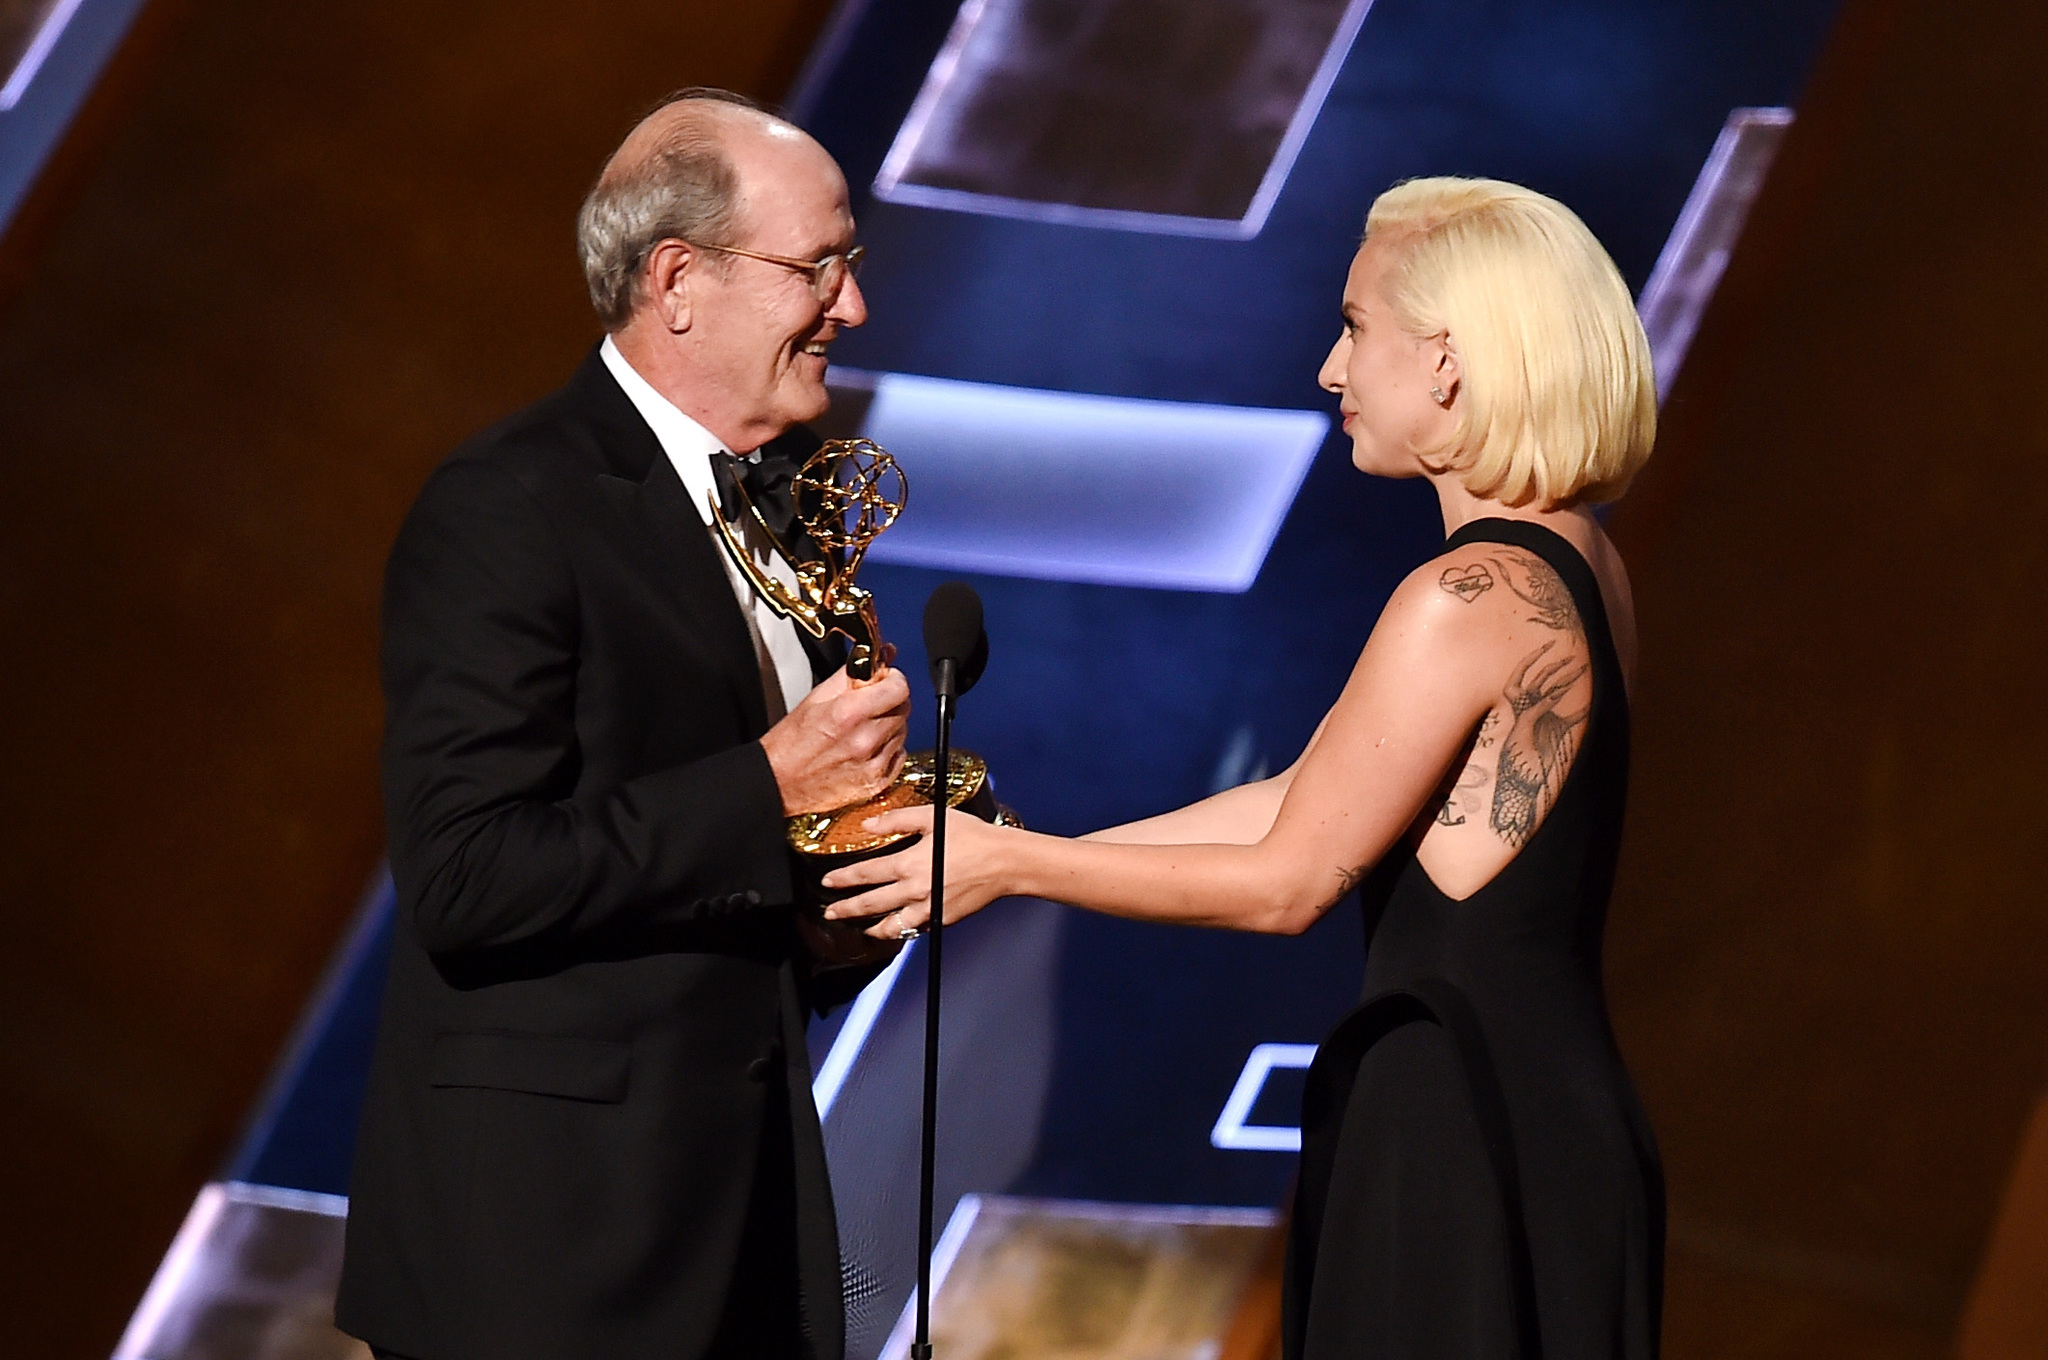 Richard Jenkins and Lady Gaga at event of The 67th Primetime Emmy Awards (2015)